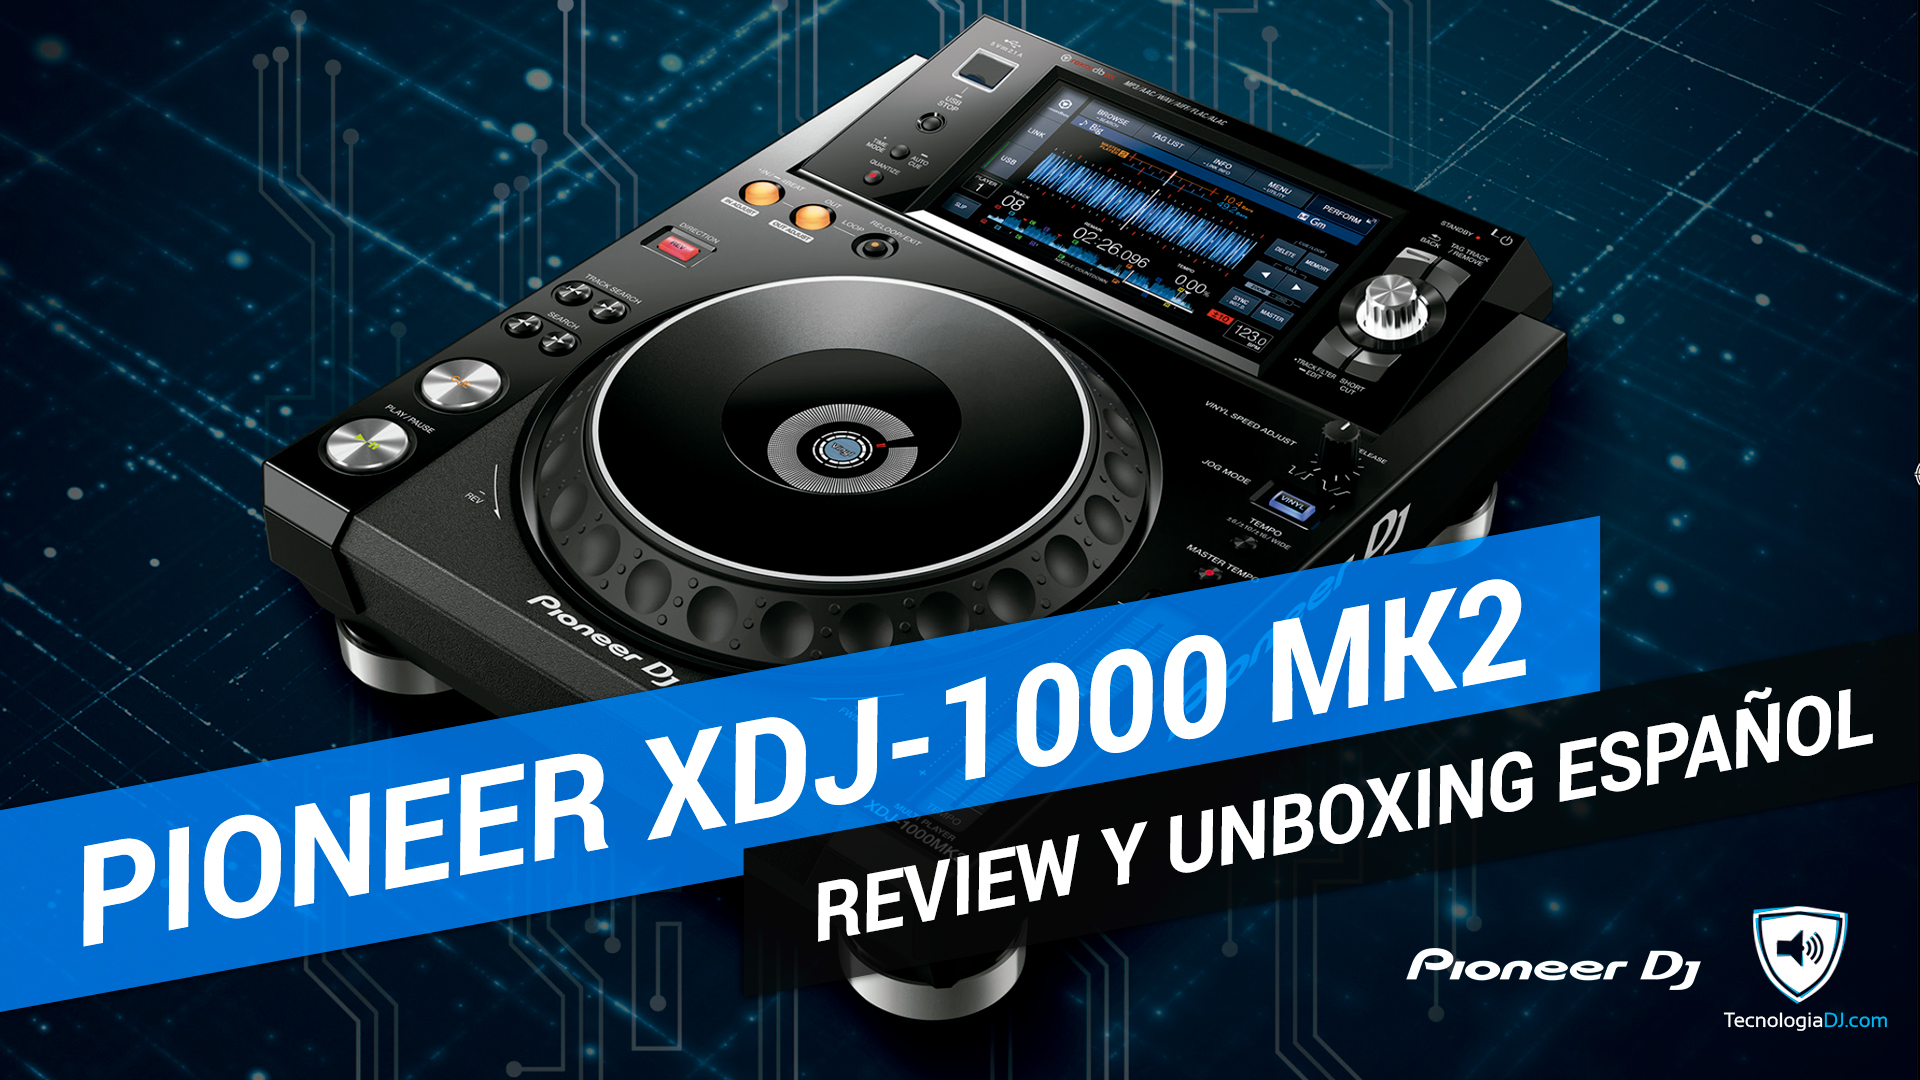 Review reproductor Pioneer XDJ-1000 MK2